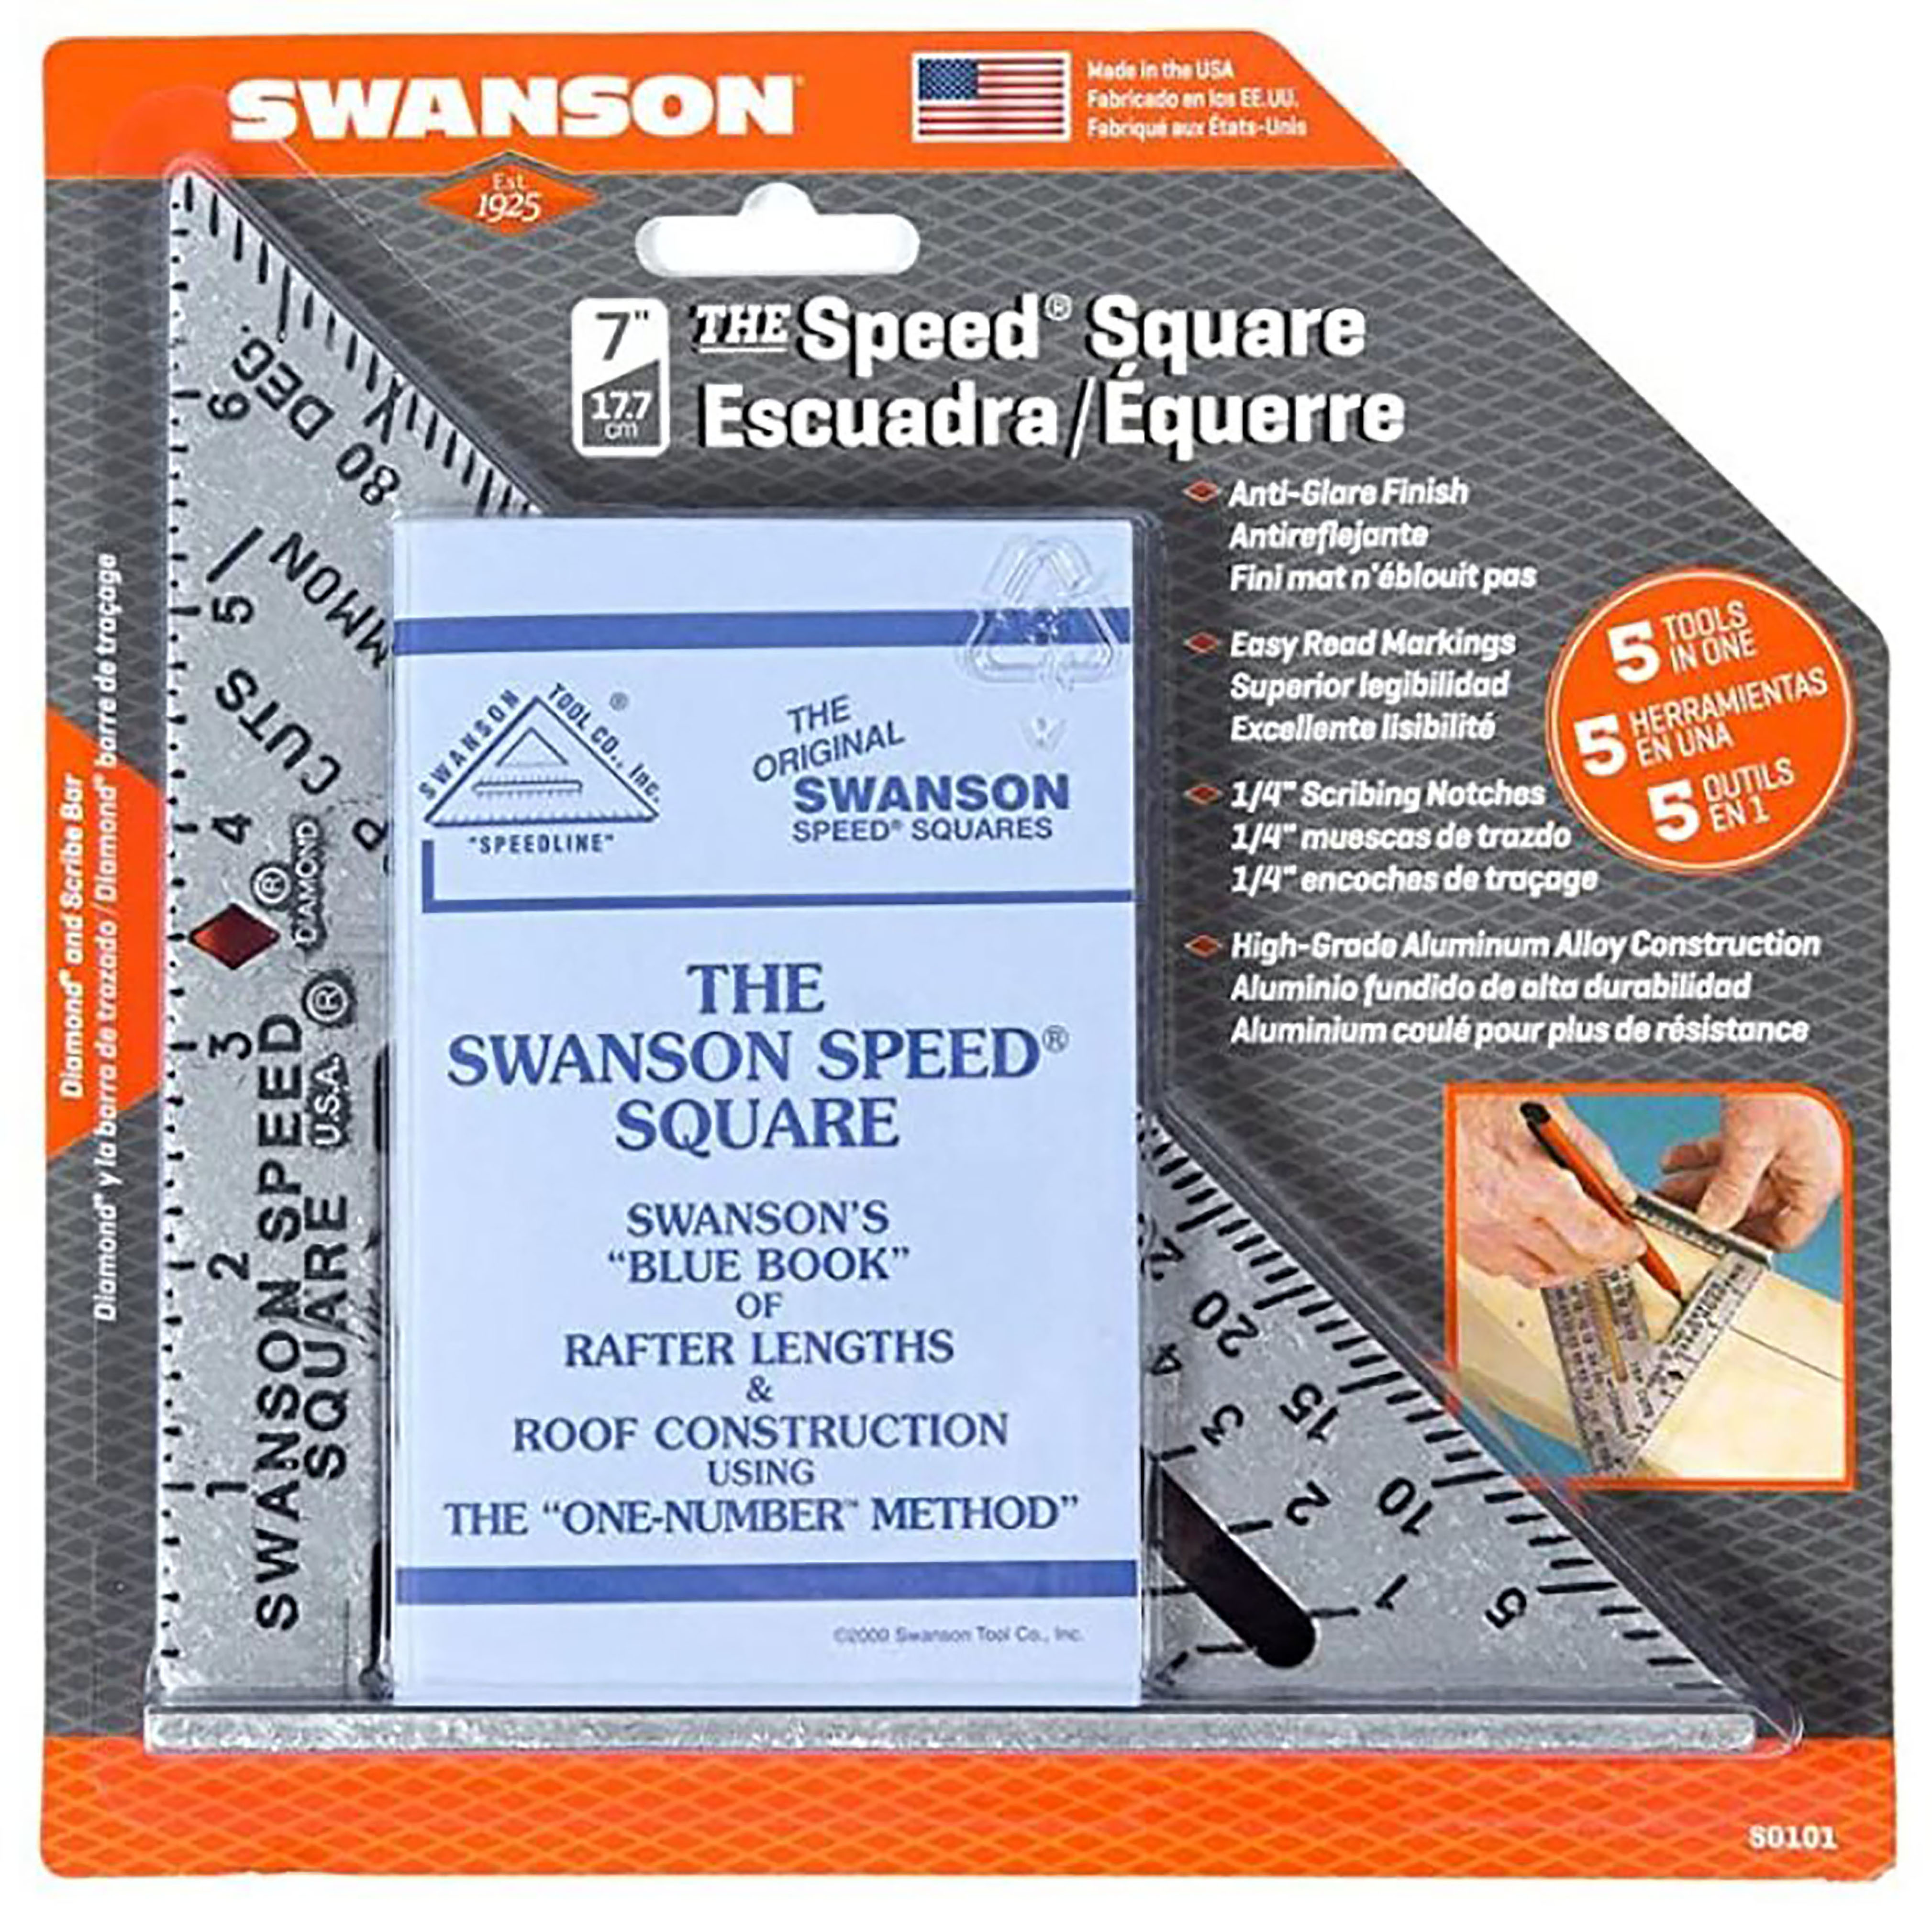 Swanson Tool 7 inch Aluminum Speed Square with Black Markings & Blue Book, Model S0101, Count Per Pack is 1 - image 1 of 9